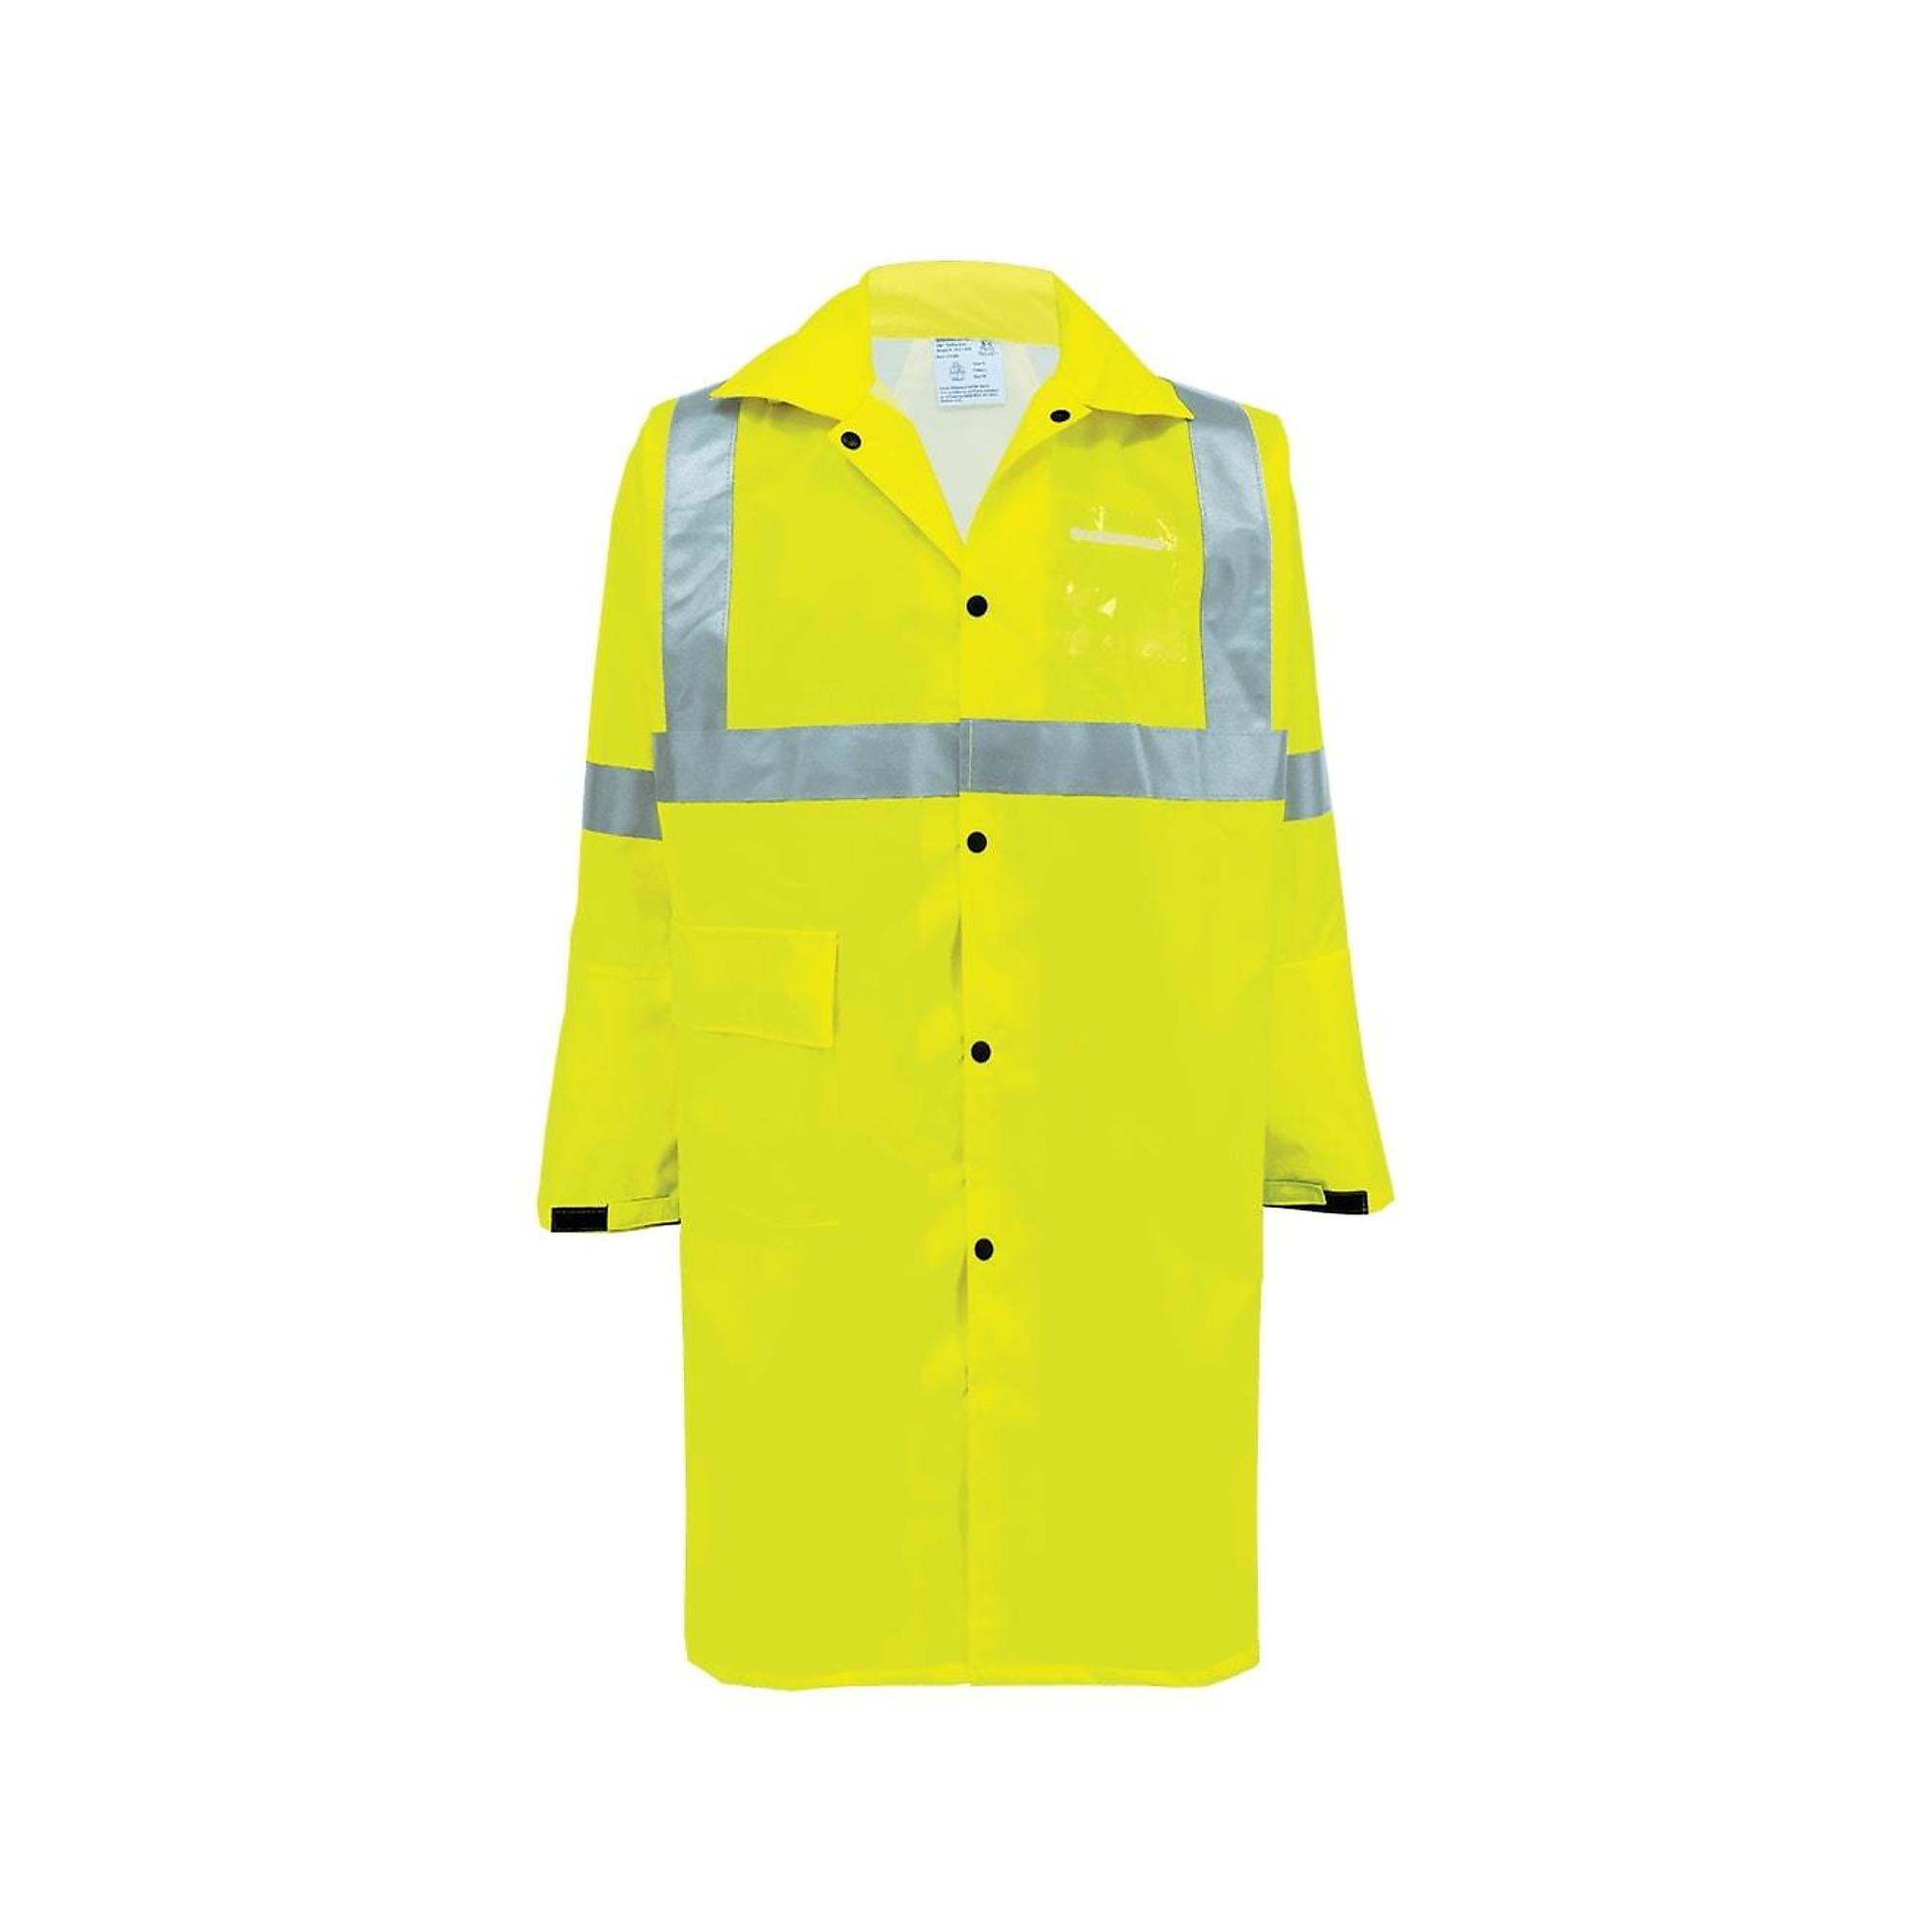 FrogWear, HV Yel/Grn, Class 3 Self-Extinguish, 1 Pocket Duster Jacket, Size 3XL, Color High-Visibility Yellow/Green, Model GLO-1450-3XL